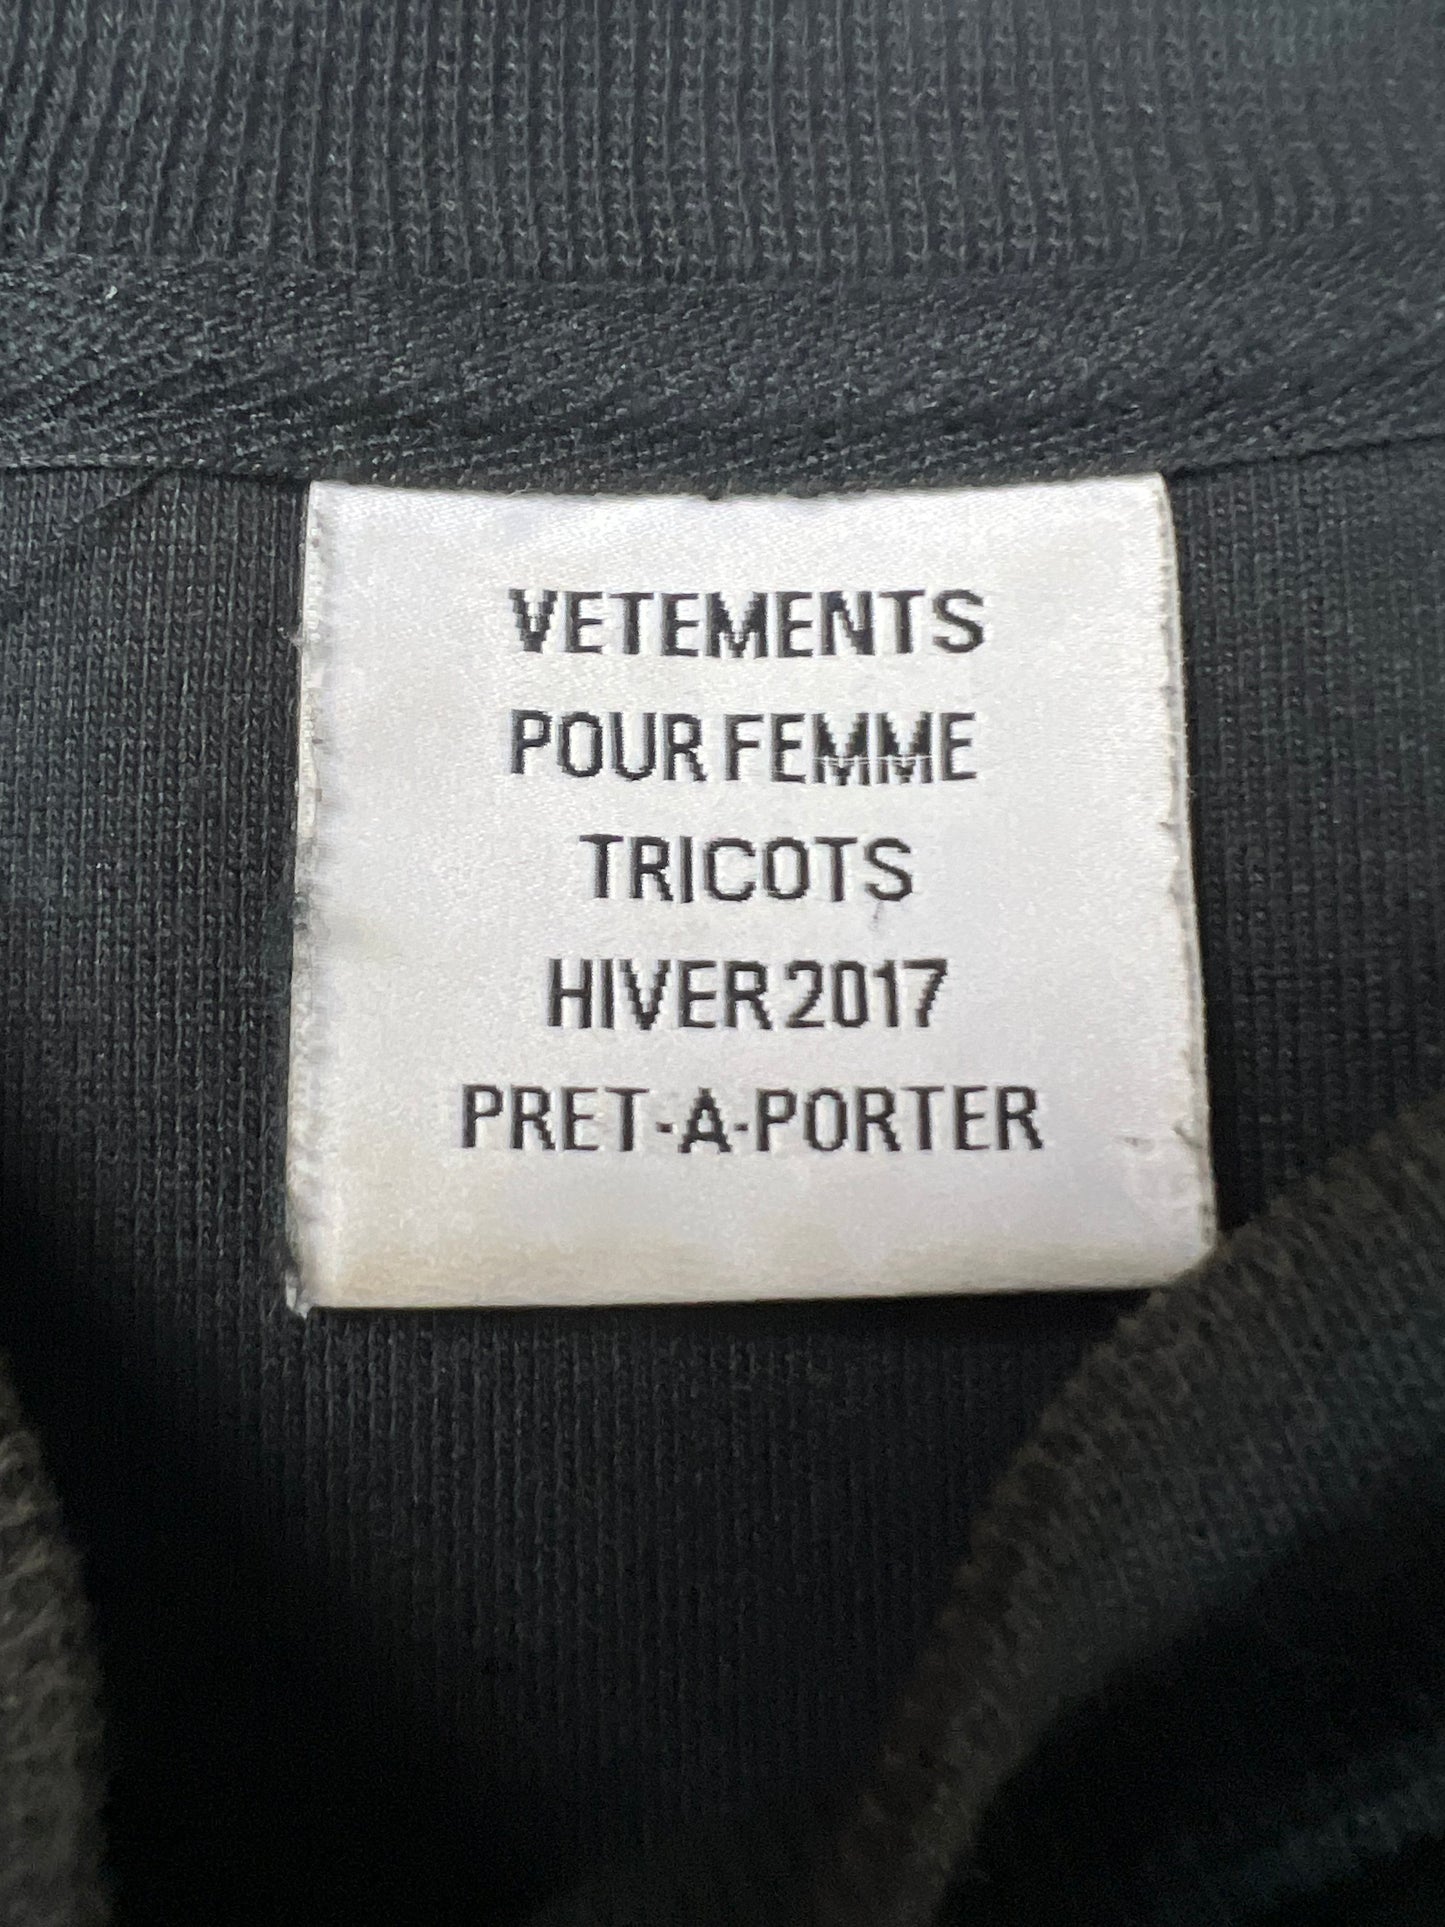 Vetements AW16 Shoulder Padded Total Fucking Darkness longsleeve T-Shirt SZ:S